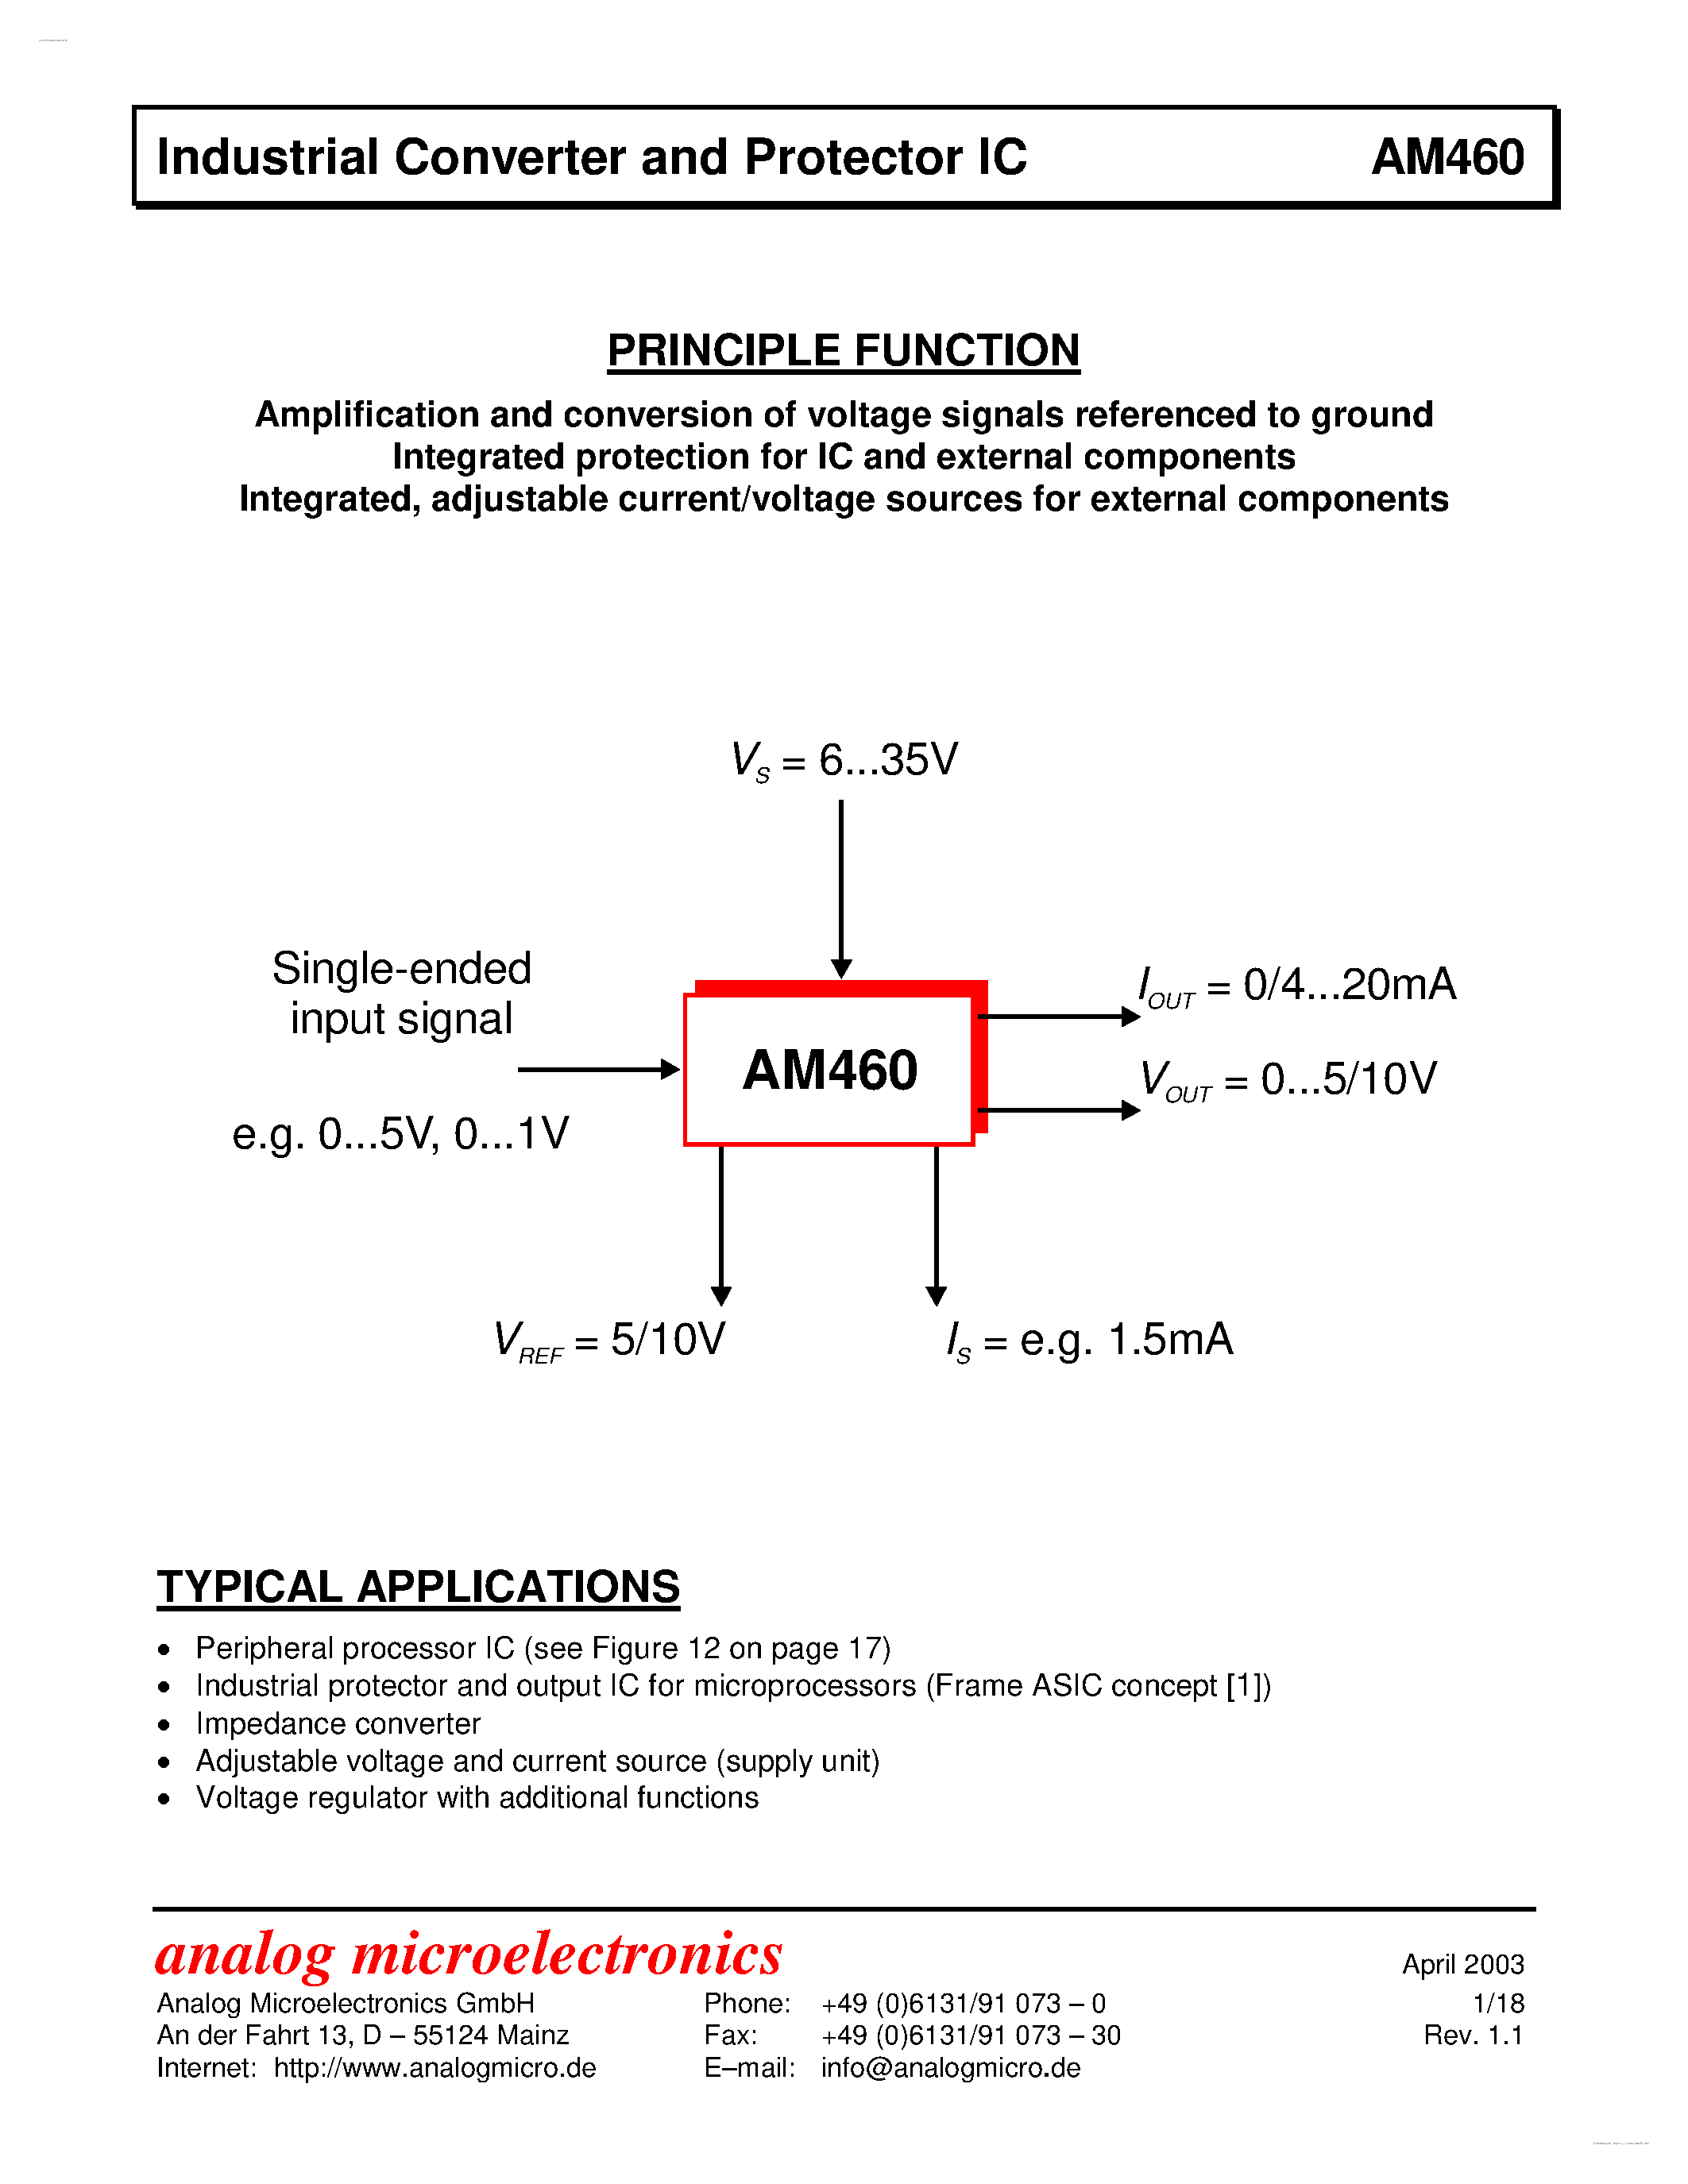 Datasheet AM460 - Industrial Converter and Protector IC page 1